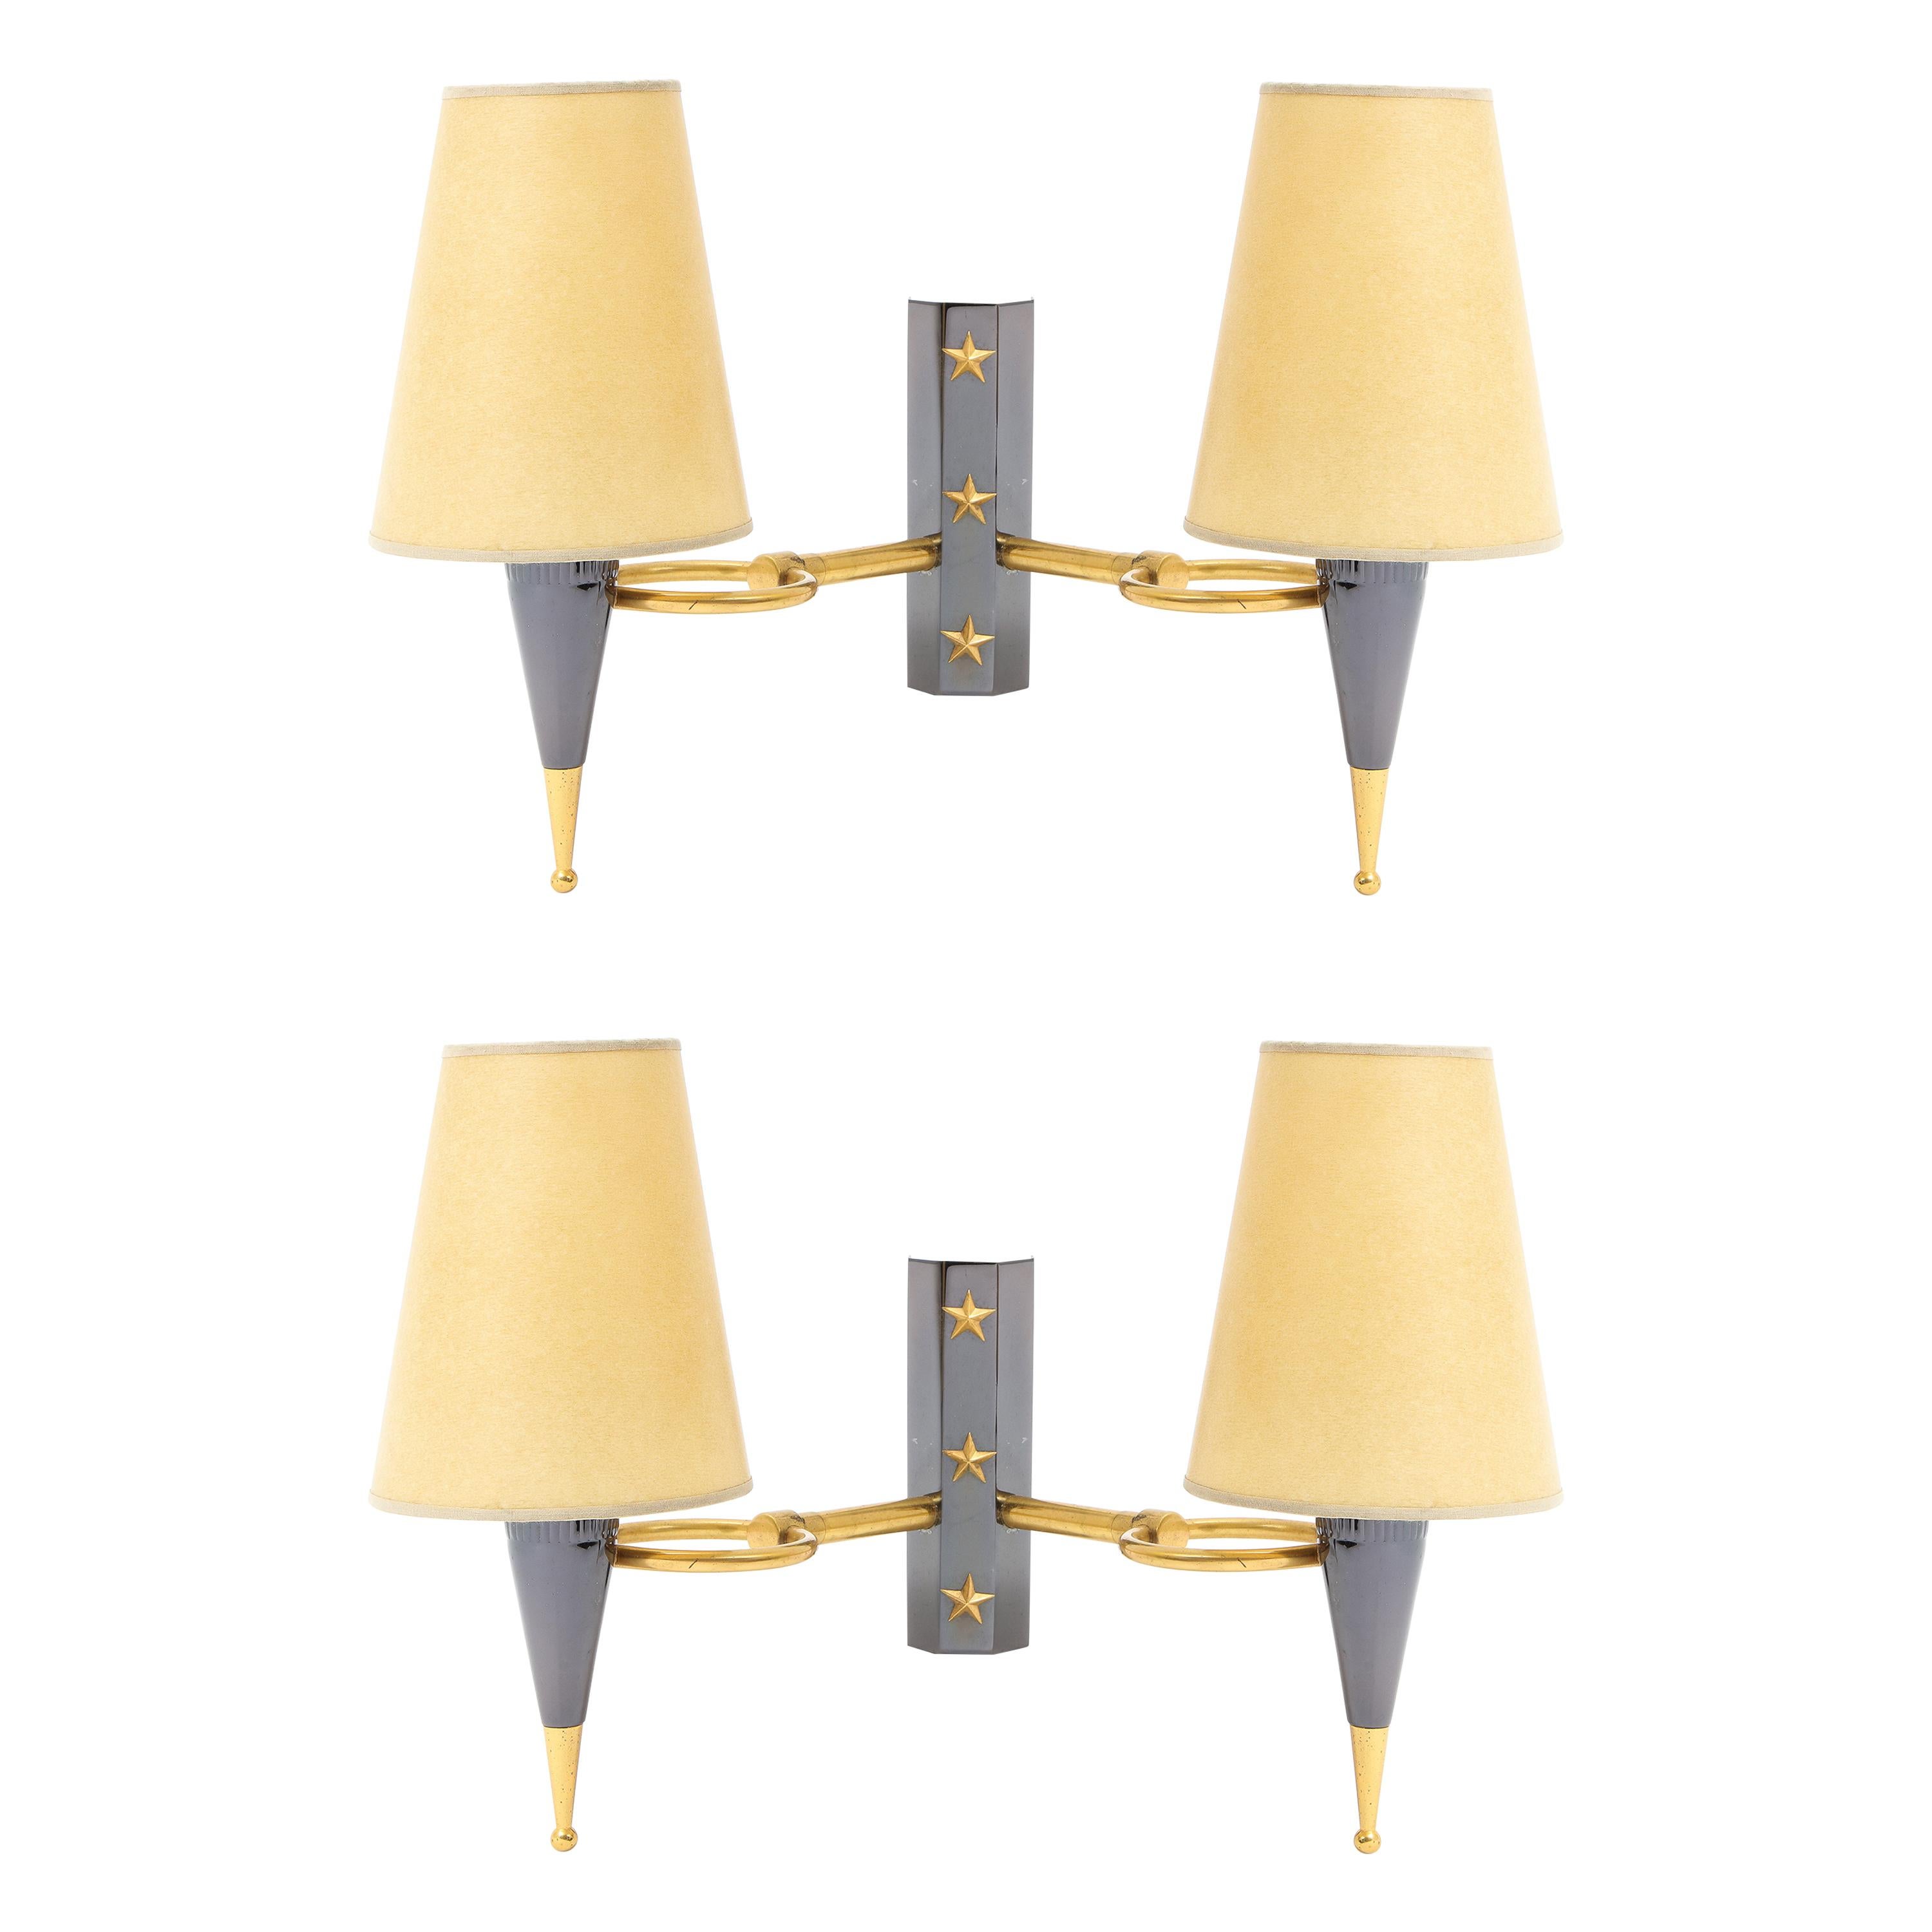 Pair of Arlus Double Light "Stars" Sconces in Gunmetal and Brass, France, 1960s